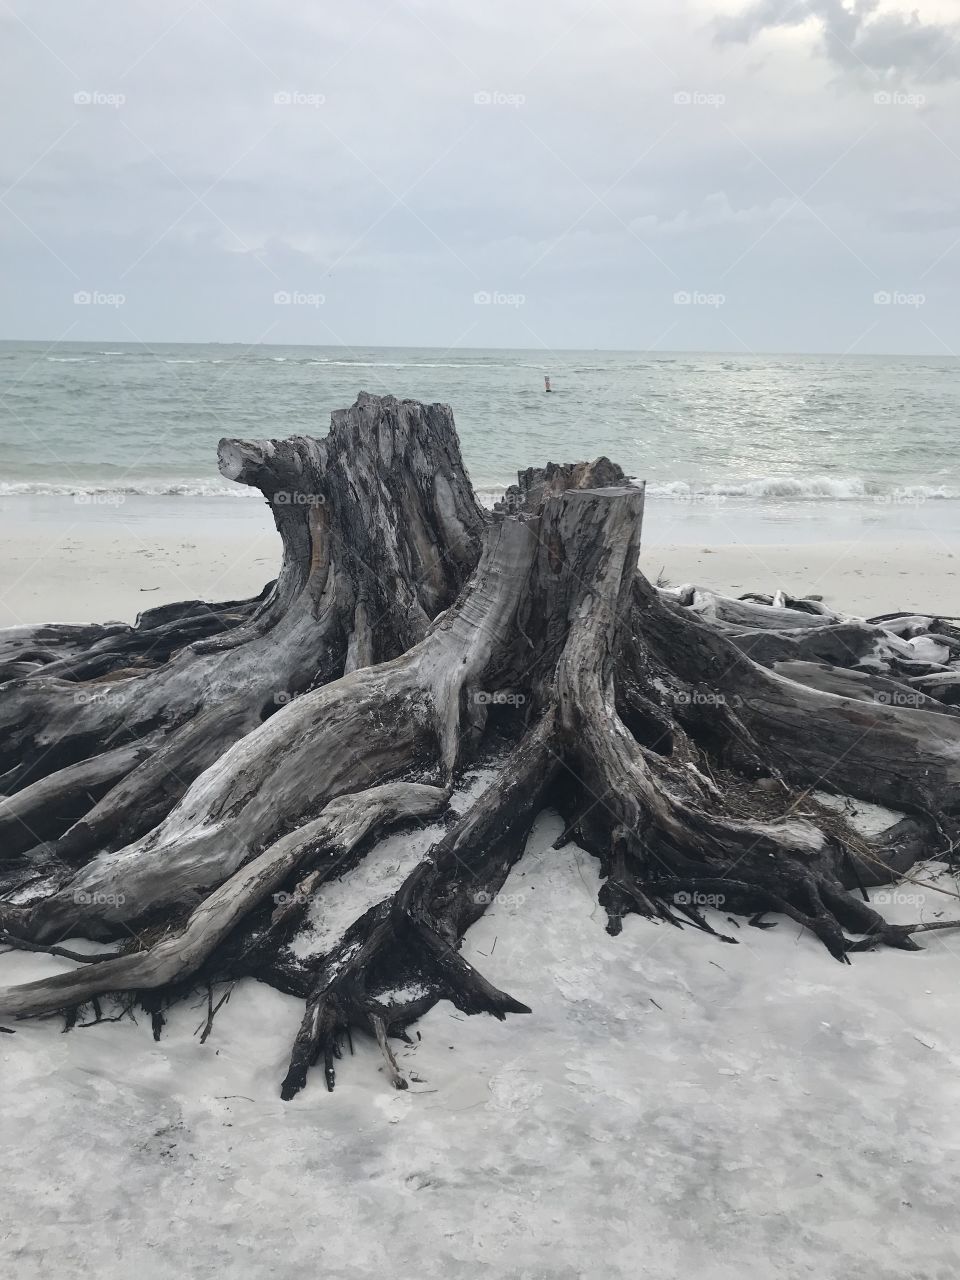 Dead tree stumps on a beach in Florida on an overcast and foggy day. 